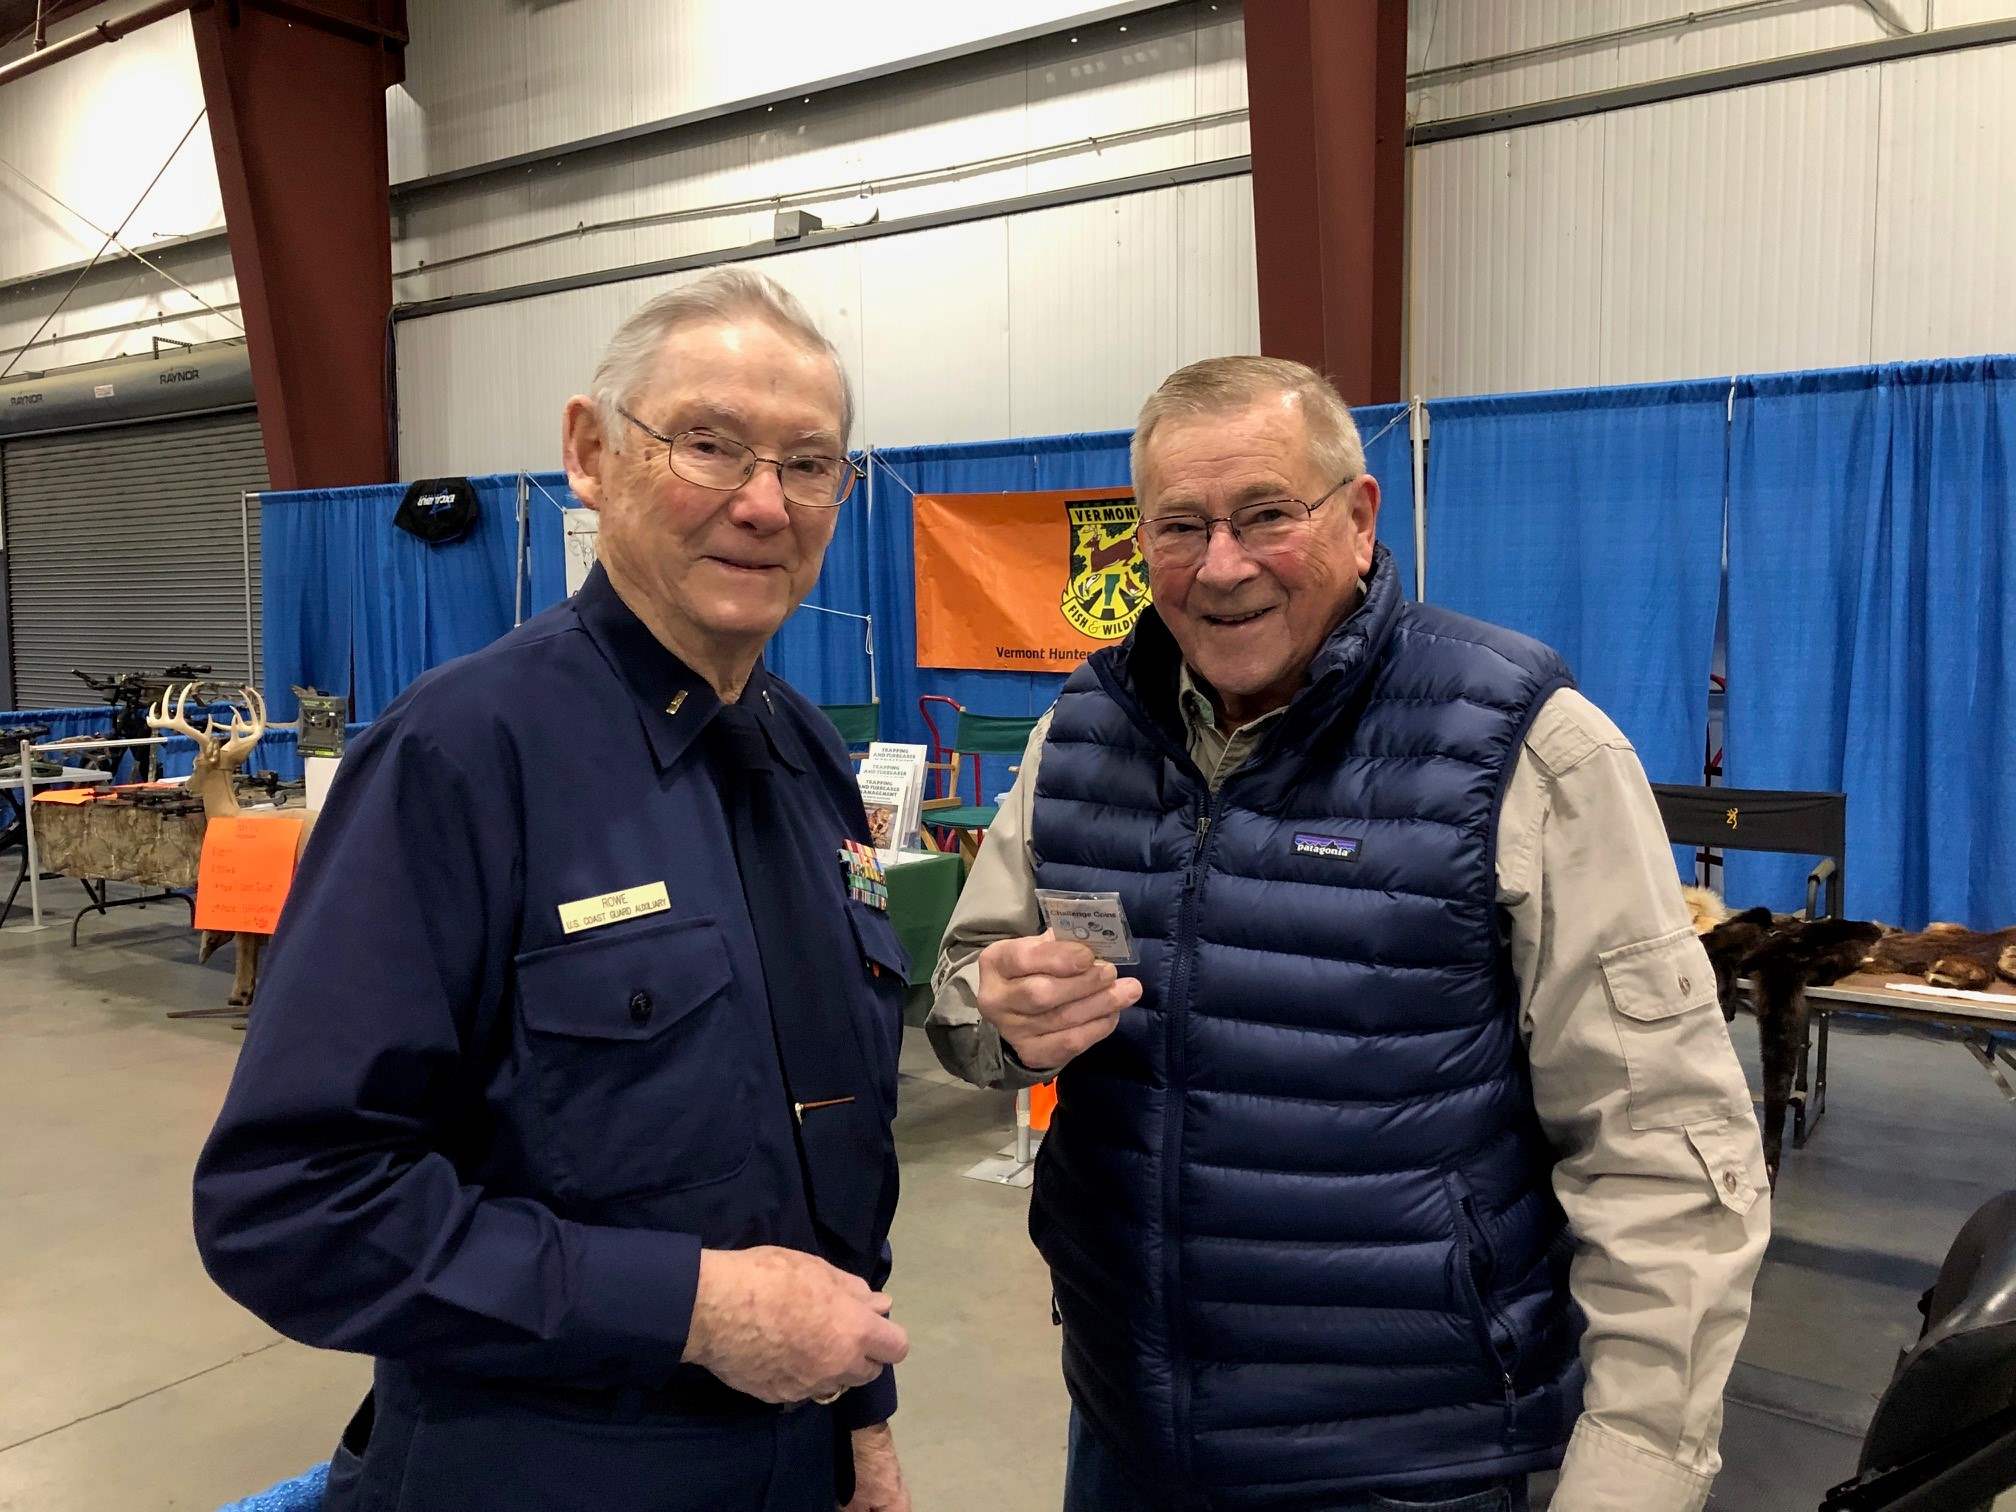 AUX member presenting flotilla coin to Sportsman Classic manager